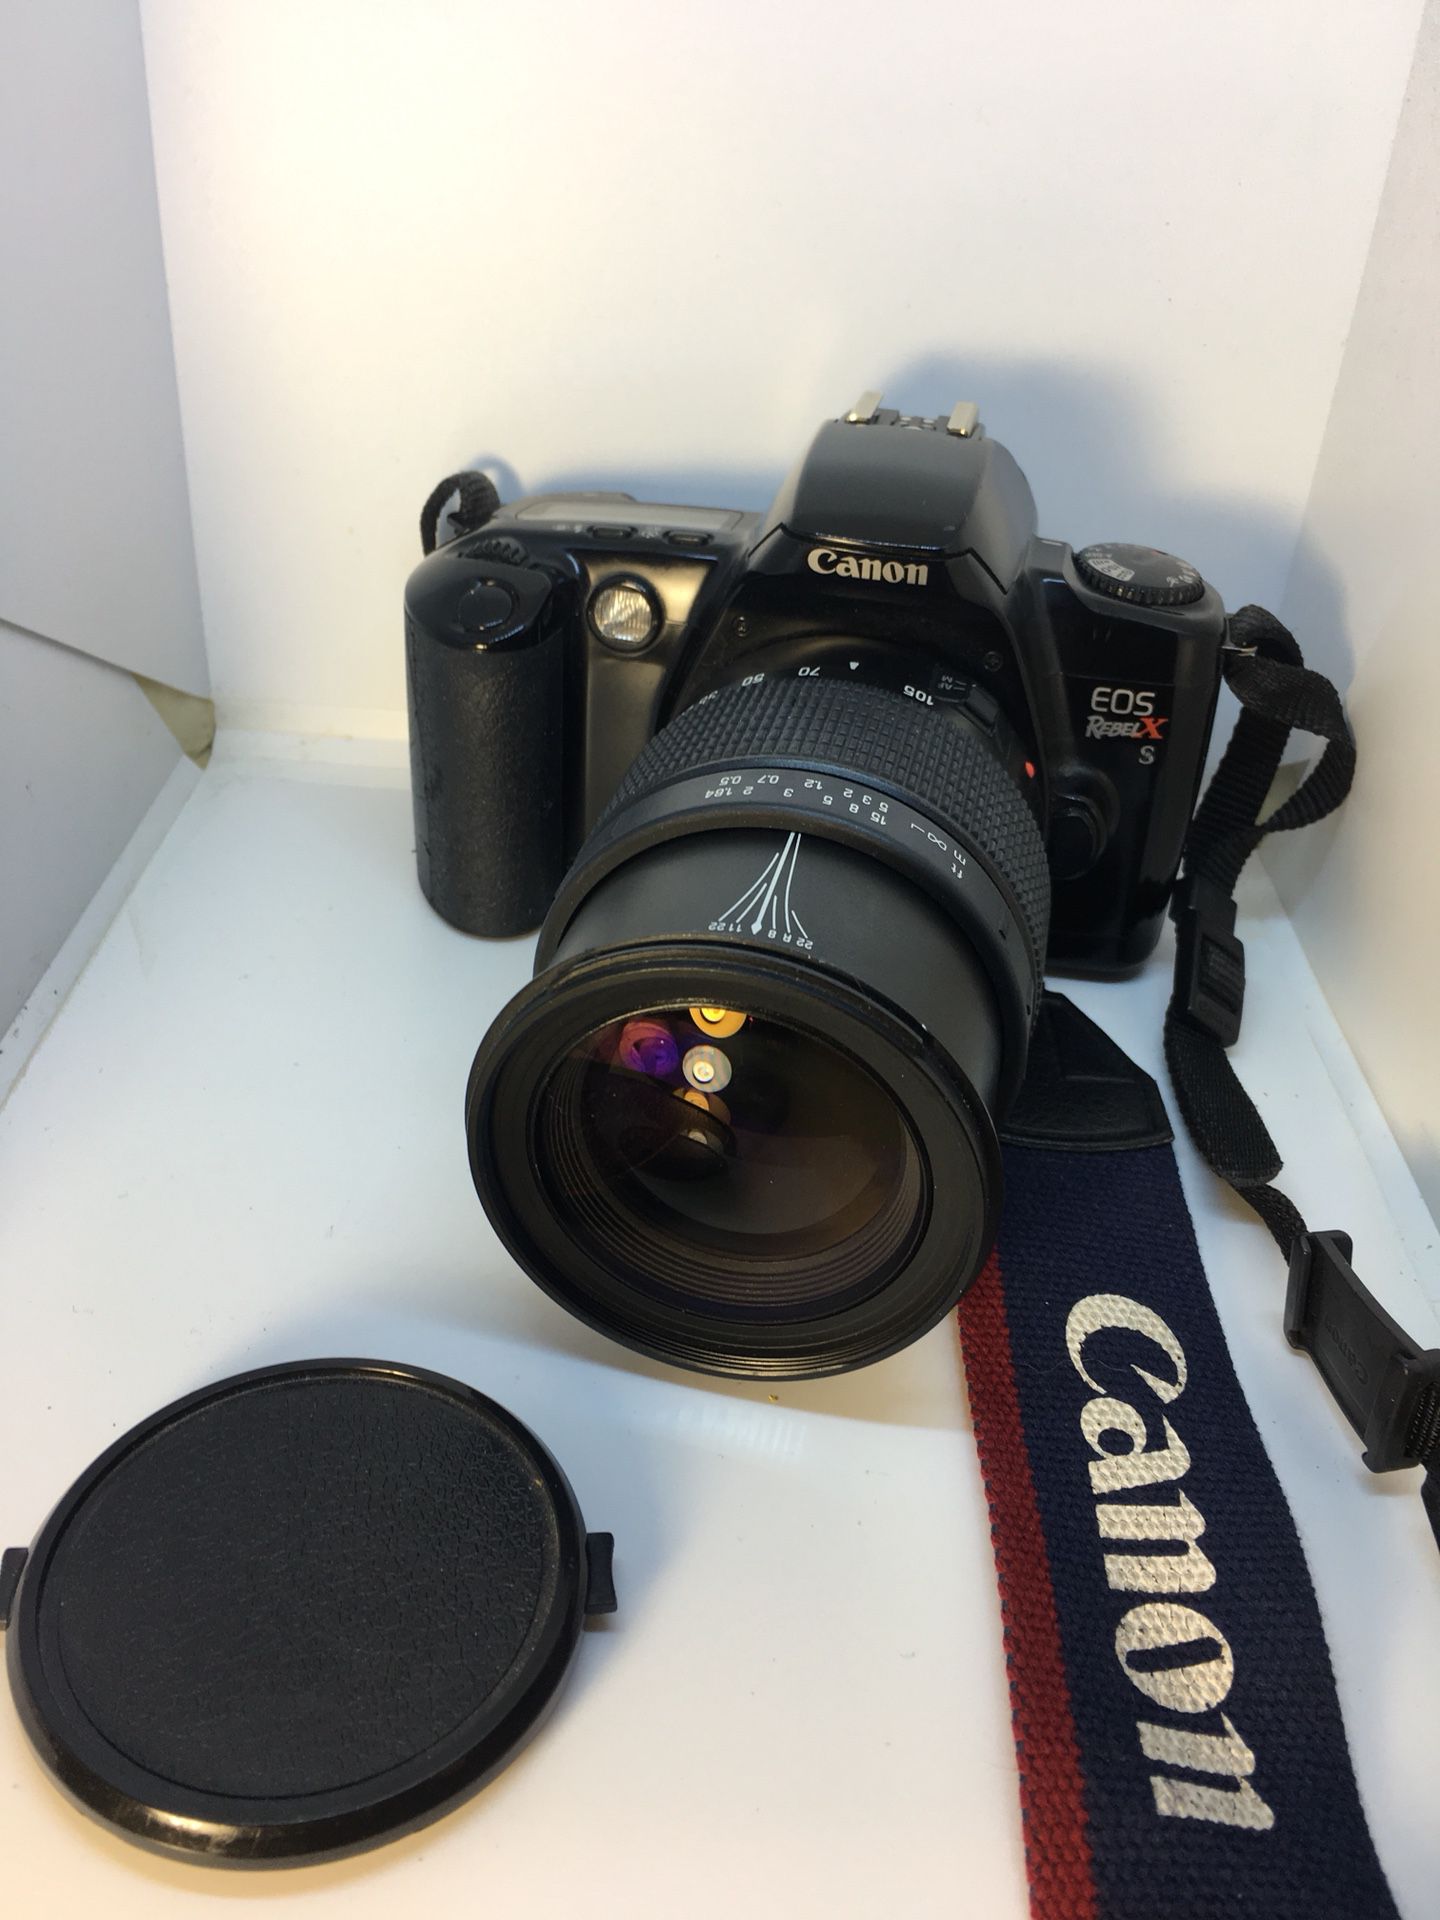 Canon EOS REBEL X 35mm film camera with promaster AF lens